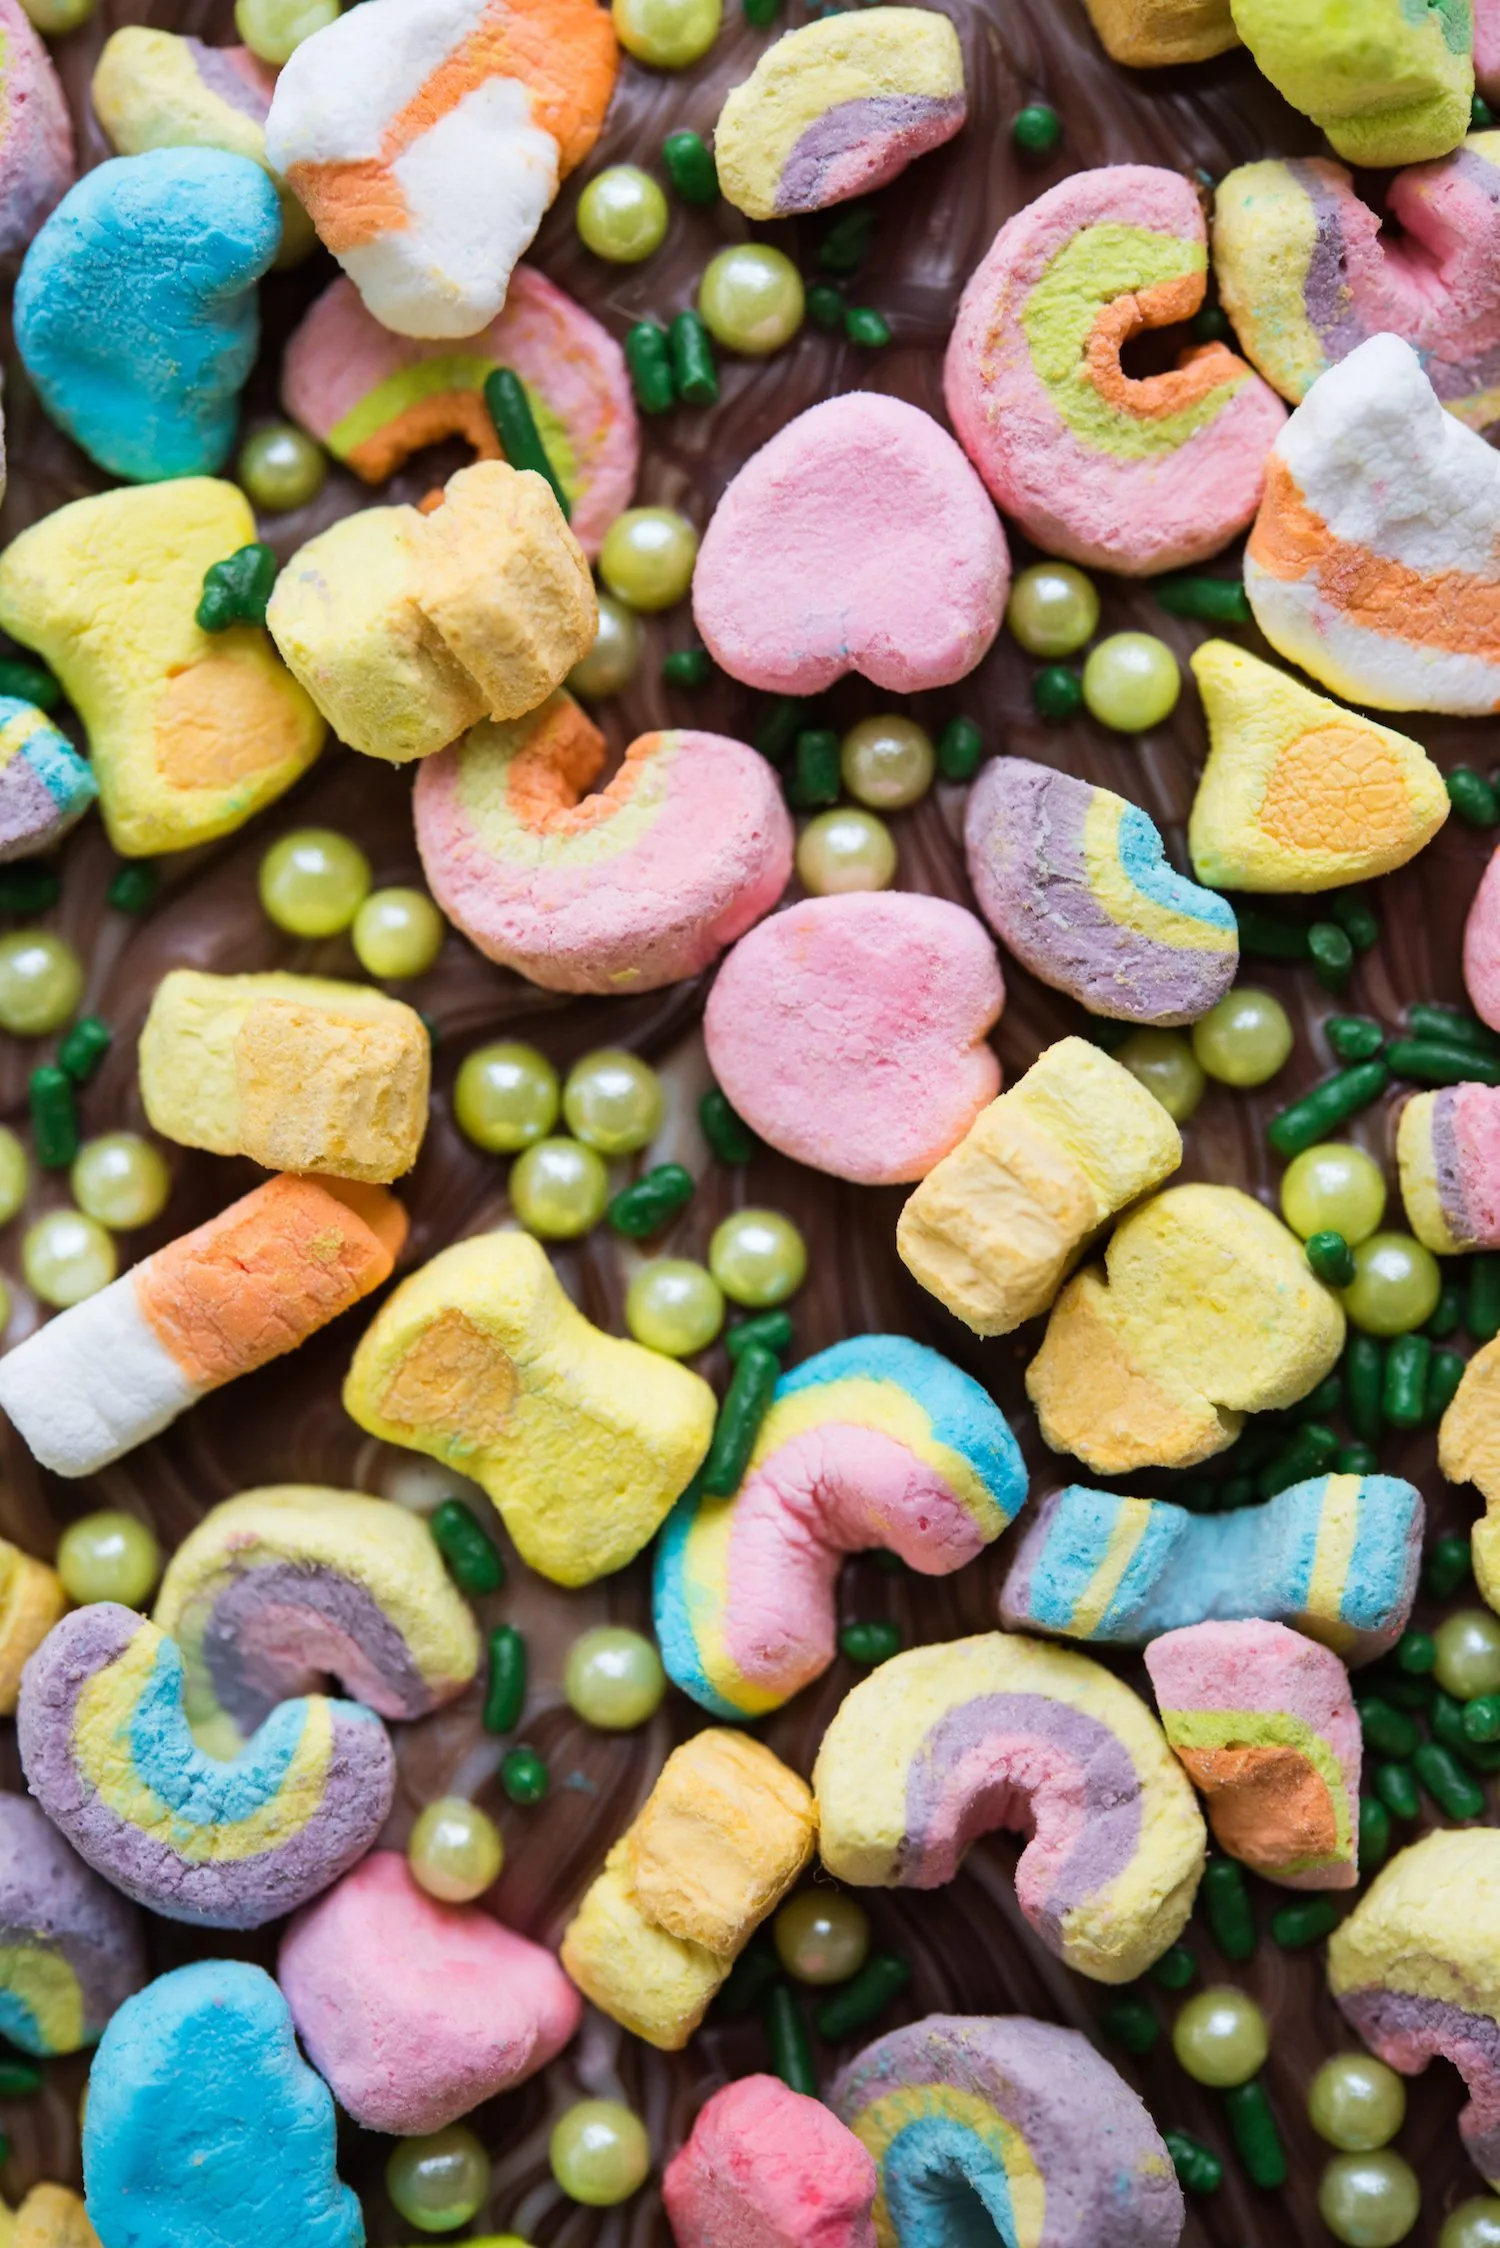 Loaded Lucky Charms St. Patrick's Day Bark | St. Patrick's Day recipes, fun St. Patrick's Day ideas for kids, entertaining ideas, party recipes and more from @cydconverse